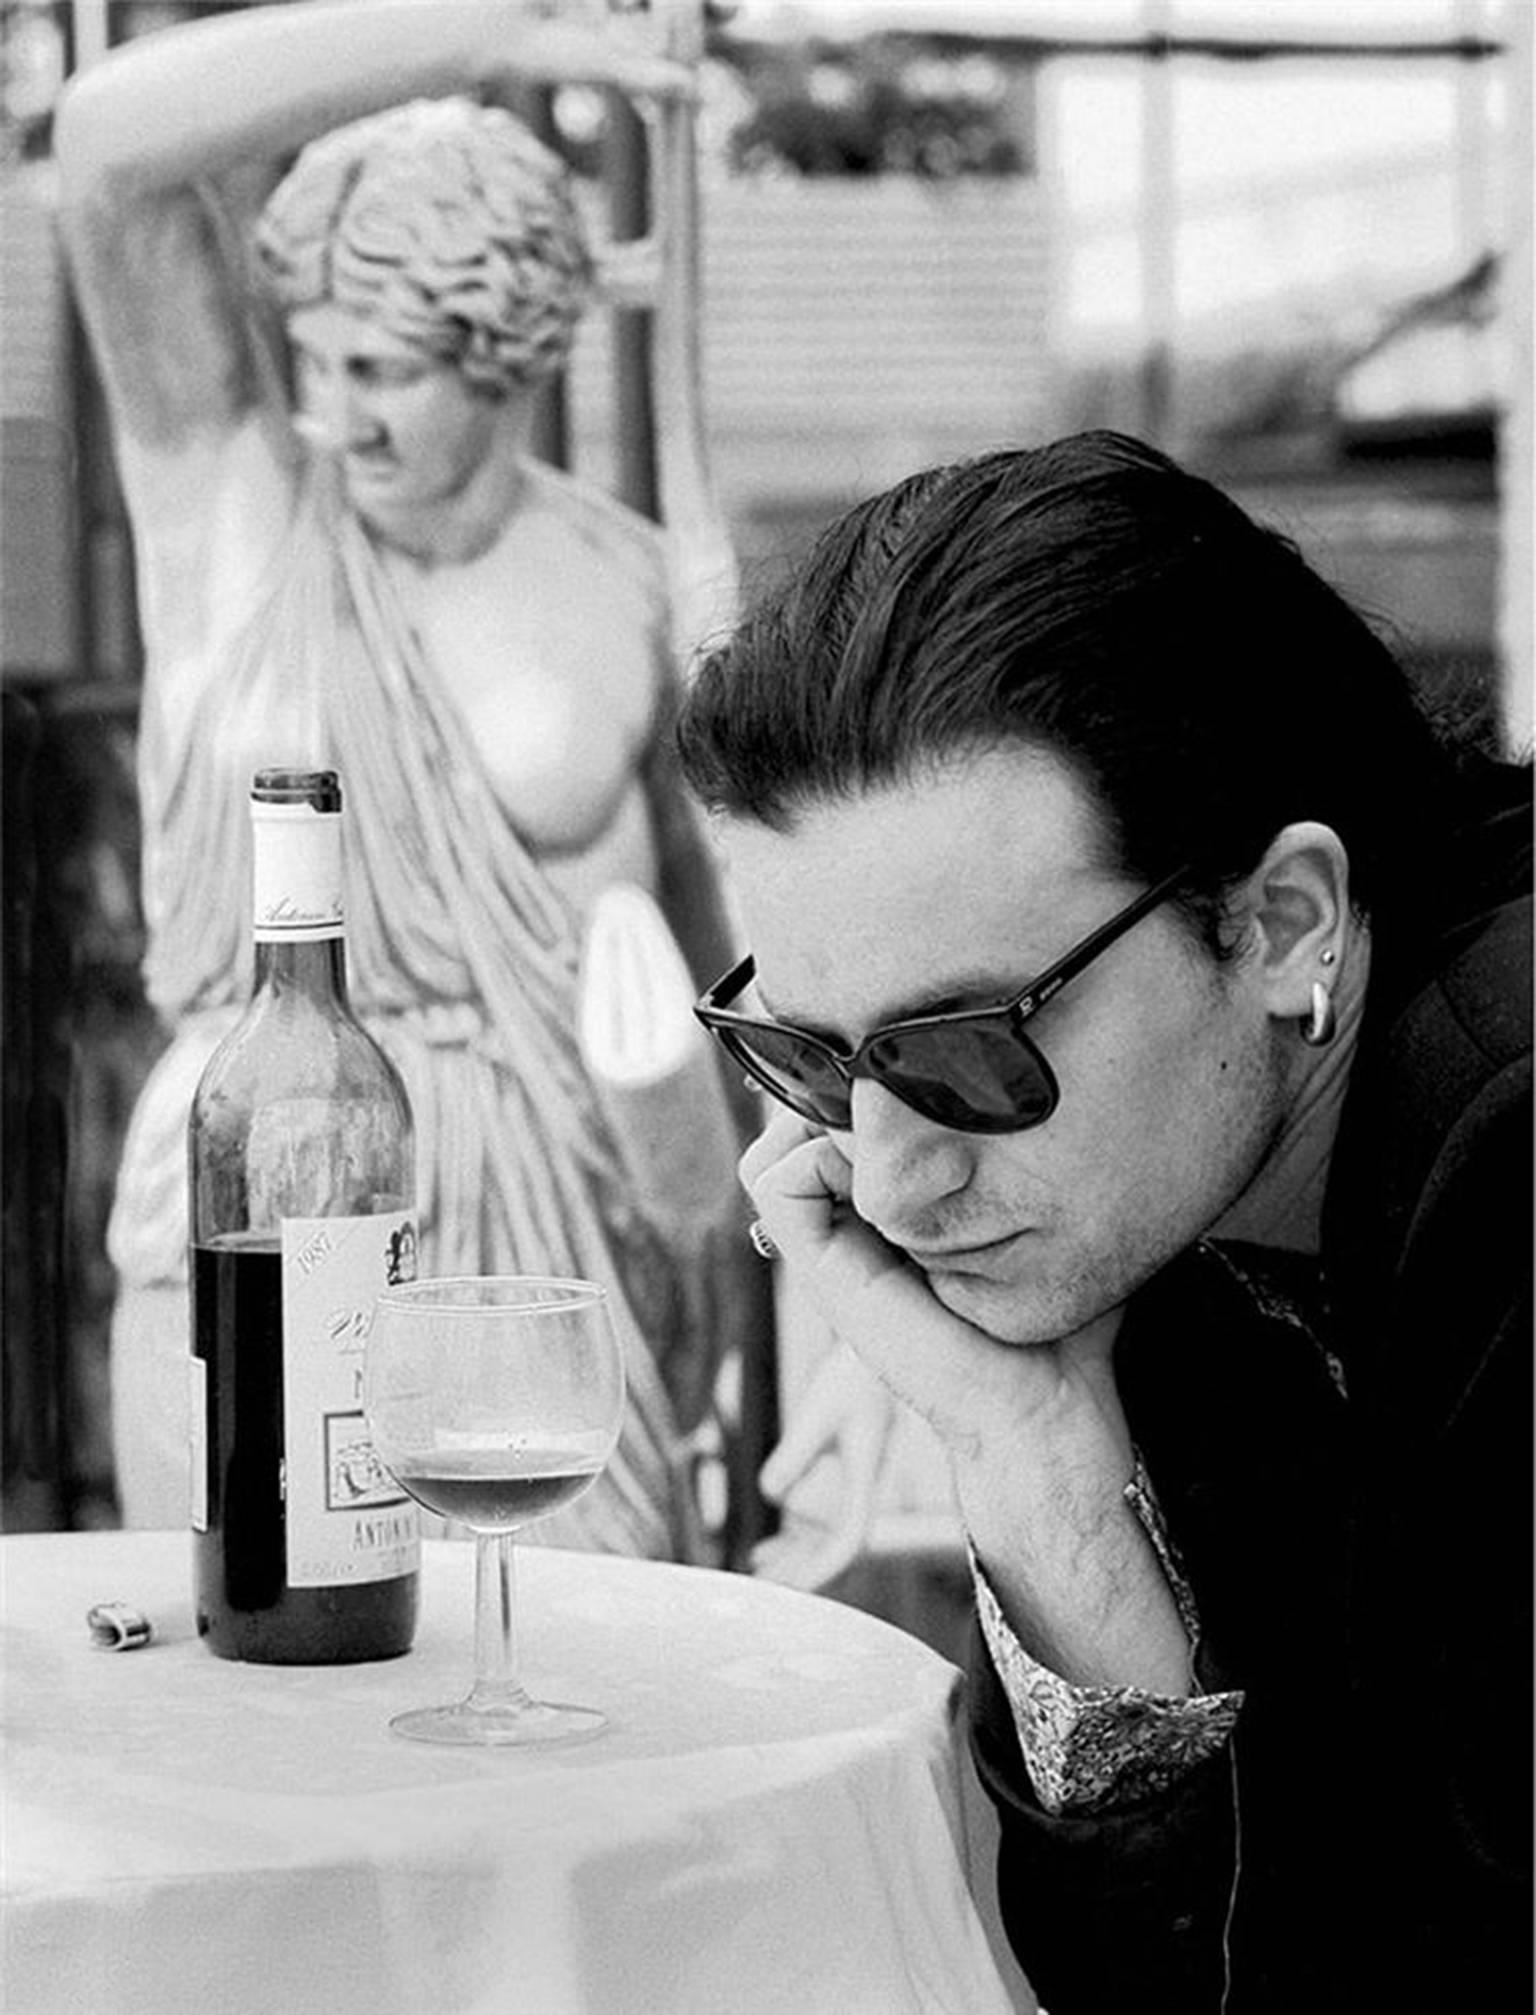 Colm Henry Black and White Photograph - Bono with wine glass in Rome, 1989